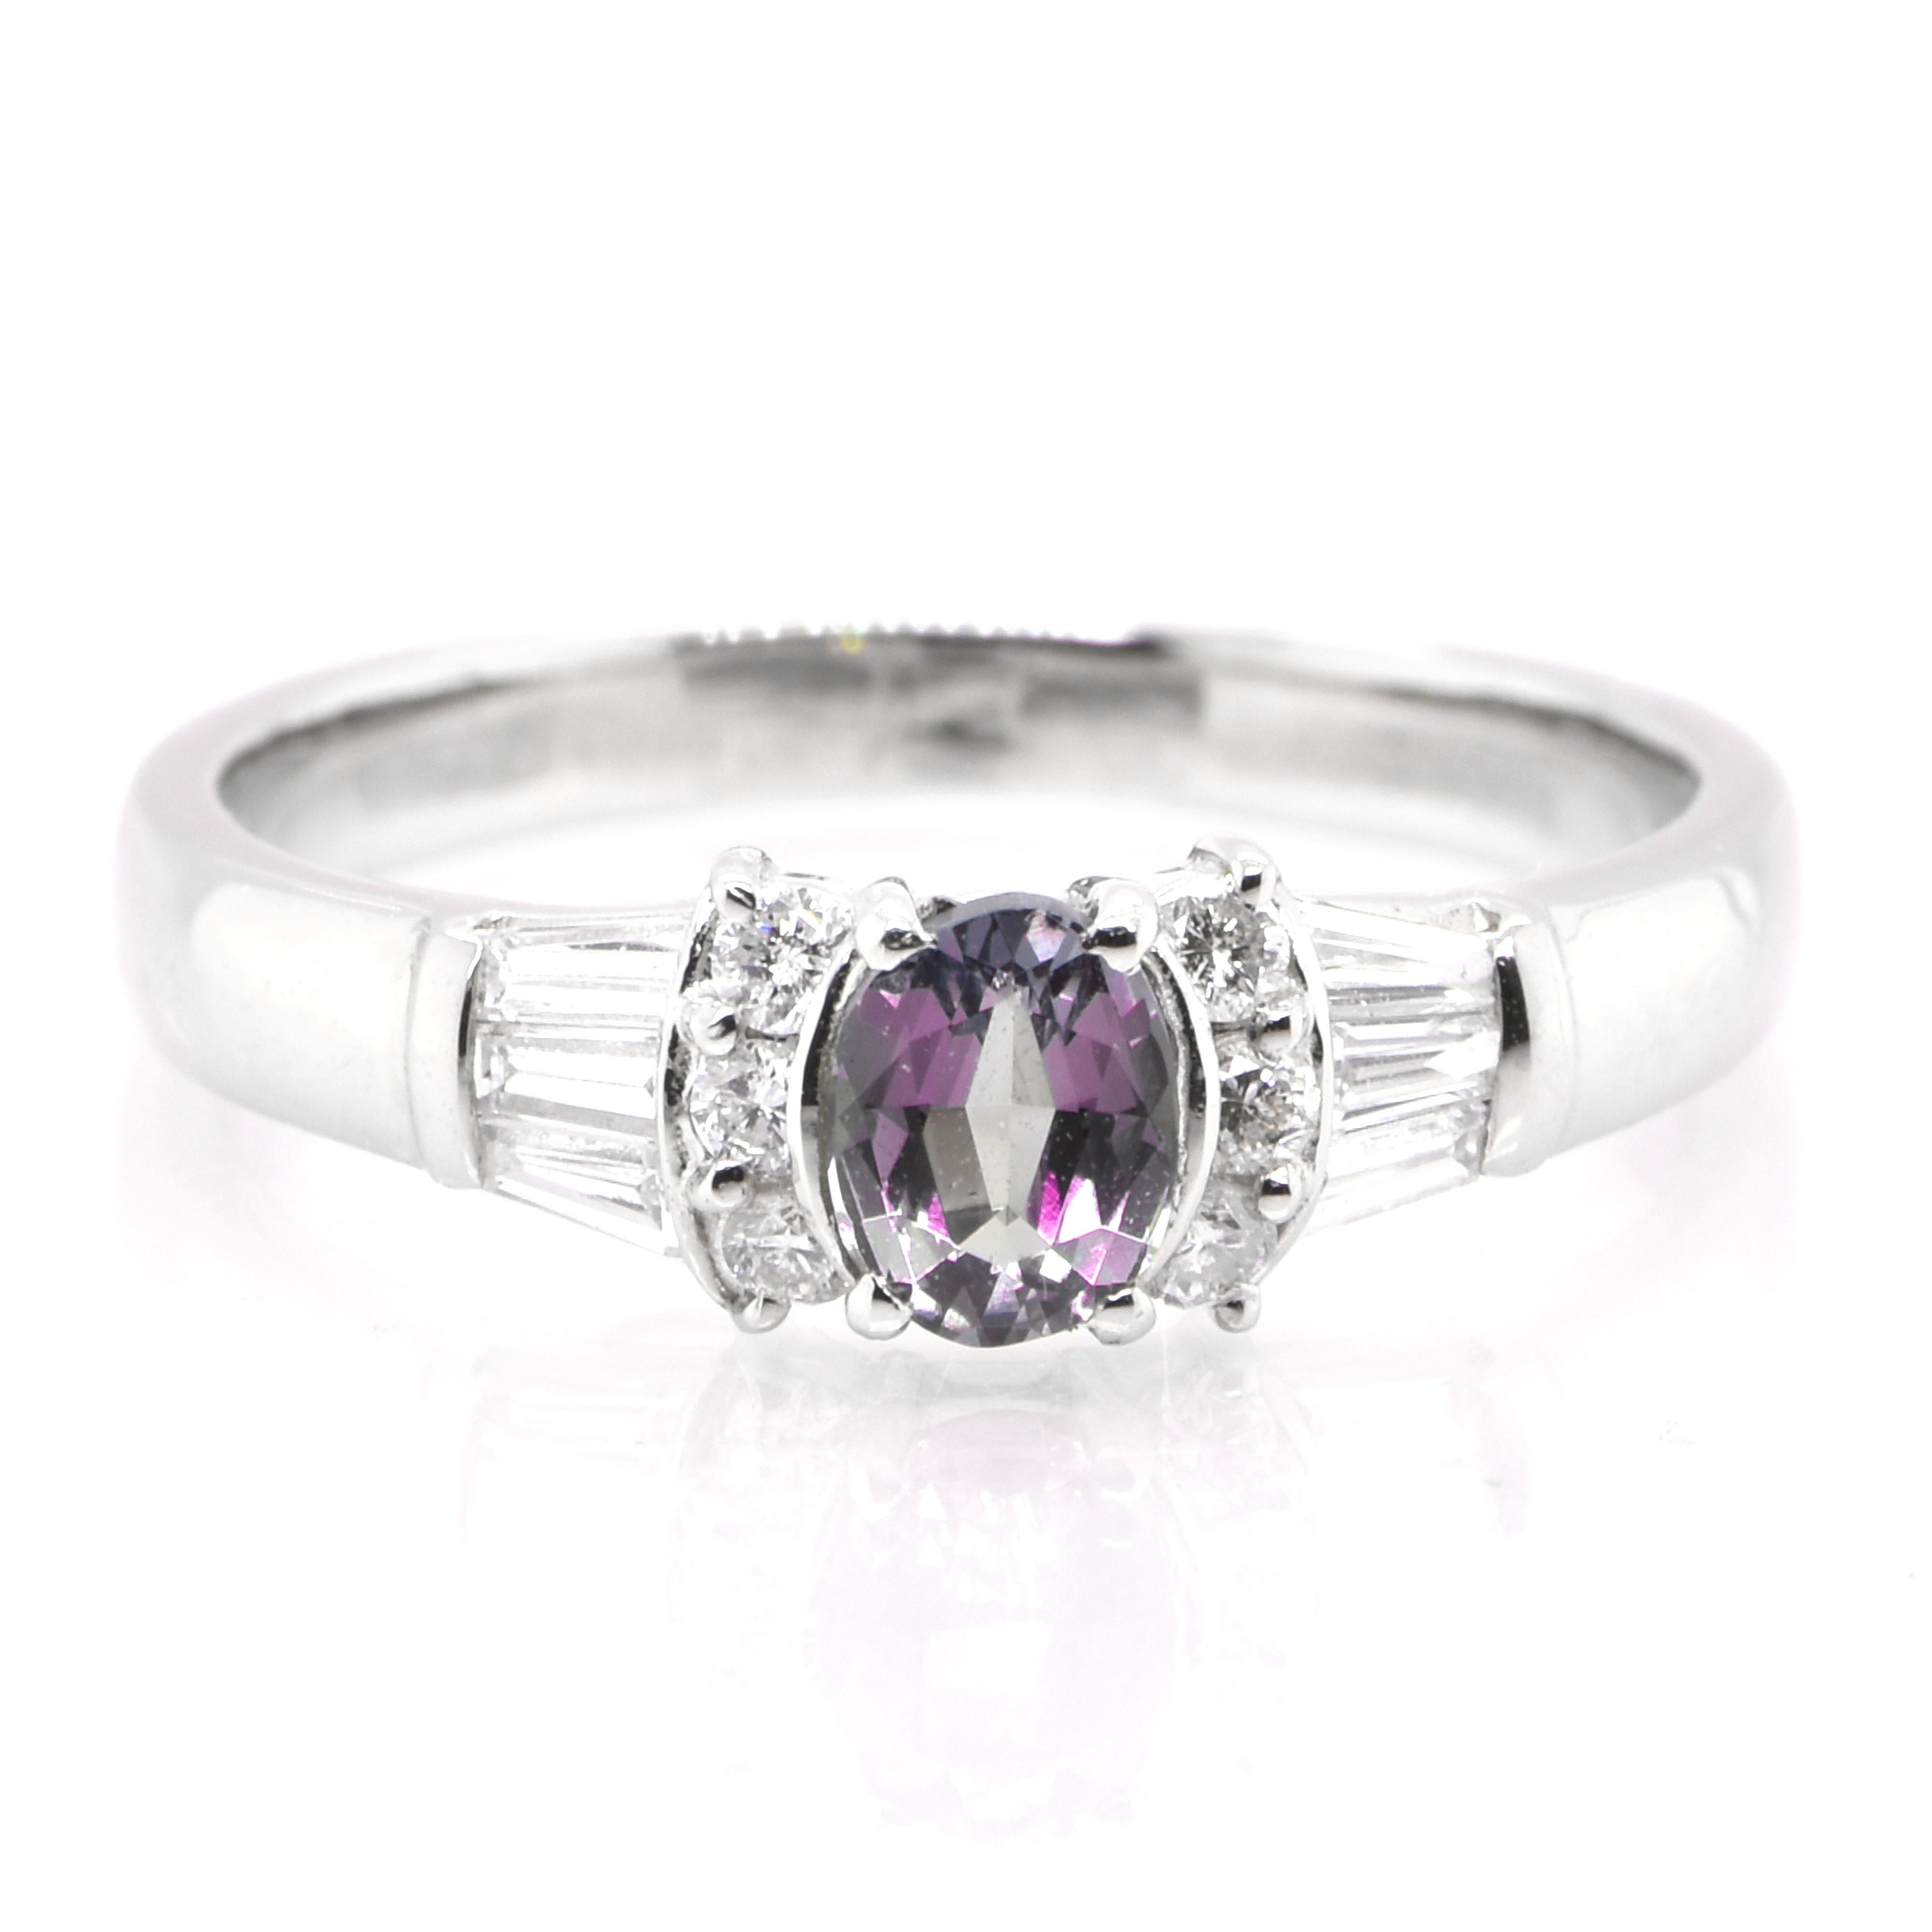 A gorgeous ring featuring a 0.43 Carat, Natural Alexandrite and 0.33 Carats of Diamond Accents set in Platinum. Alexandrites produce a natural color-change phenomenon as they exhibit a Bluish Green Color under Fluorescent Light whereas a Purplish